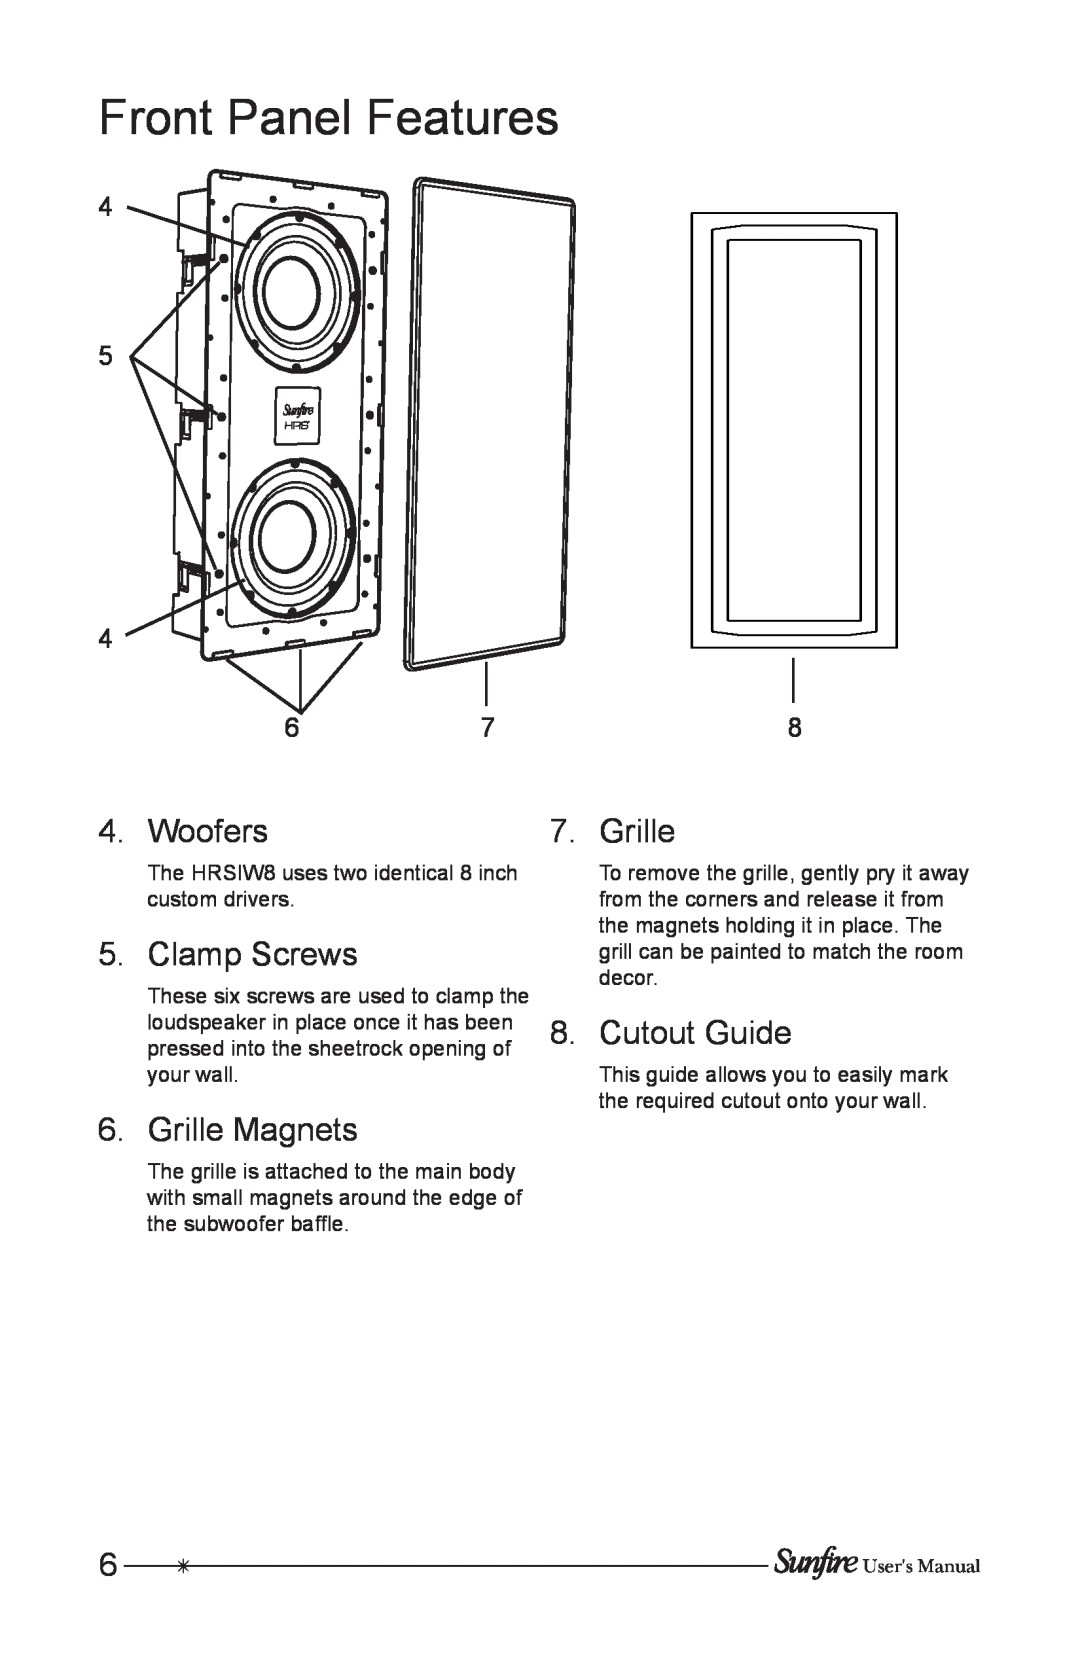 Sunfire HRSIW8 user manual Front Panel Features, Woofers, Clamp Screws, Grille Magnets, Cutout Guide 